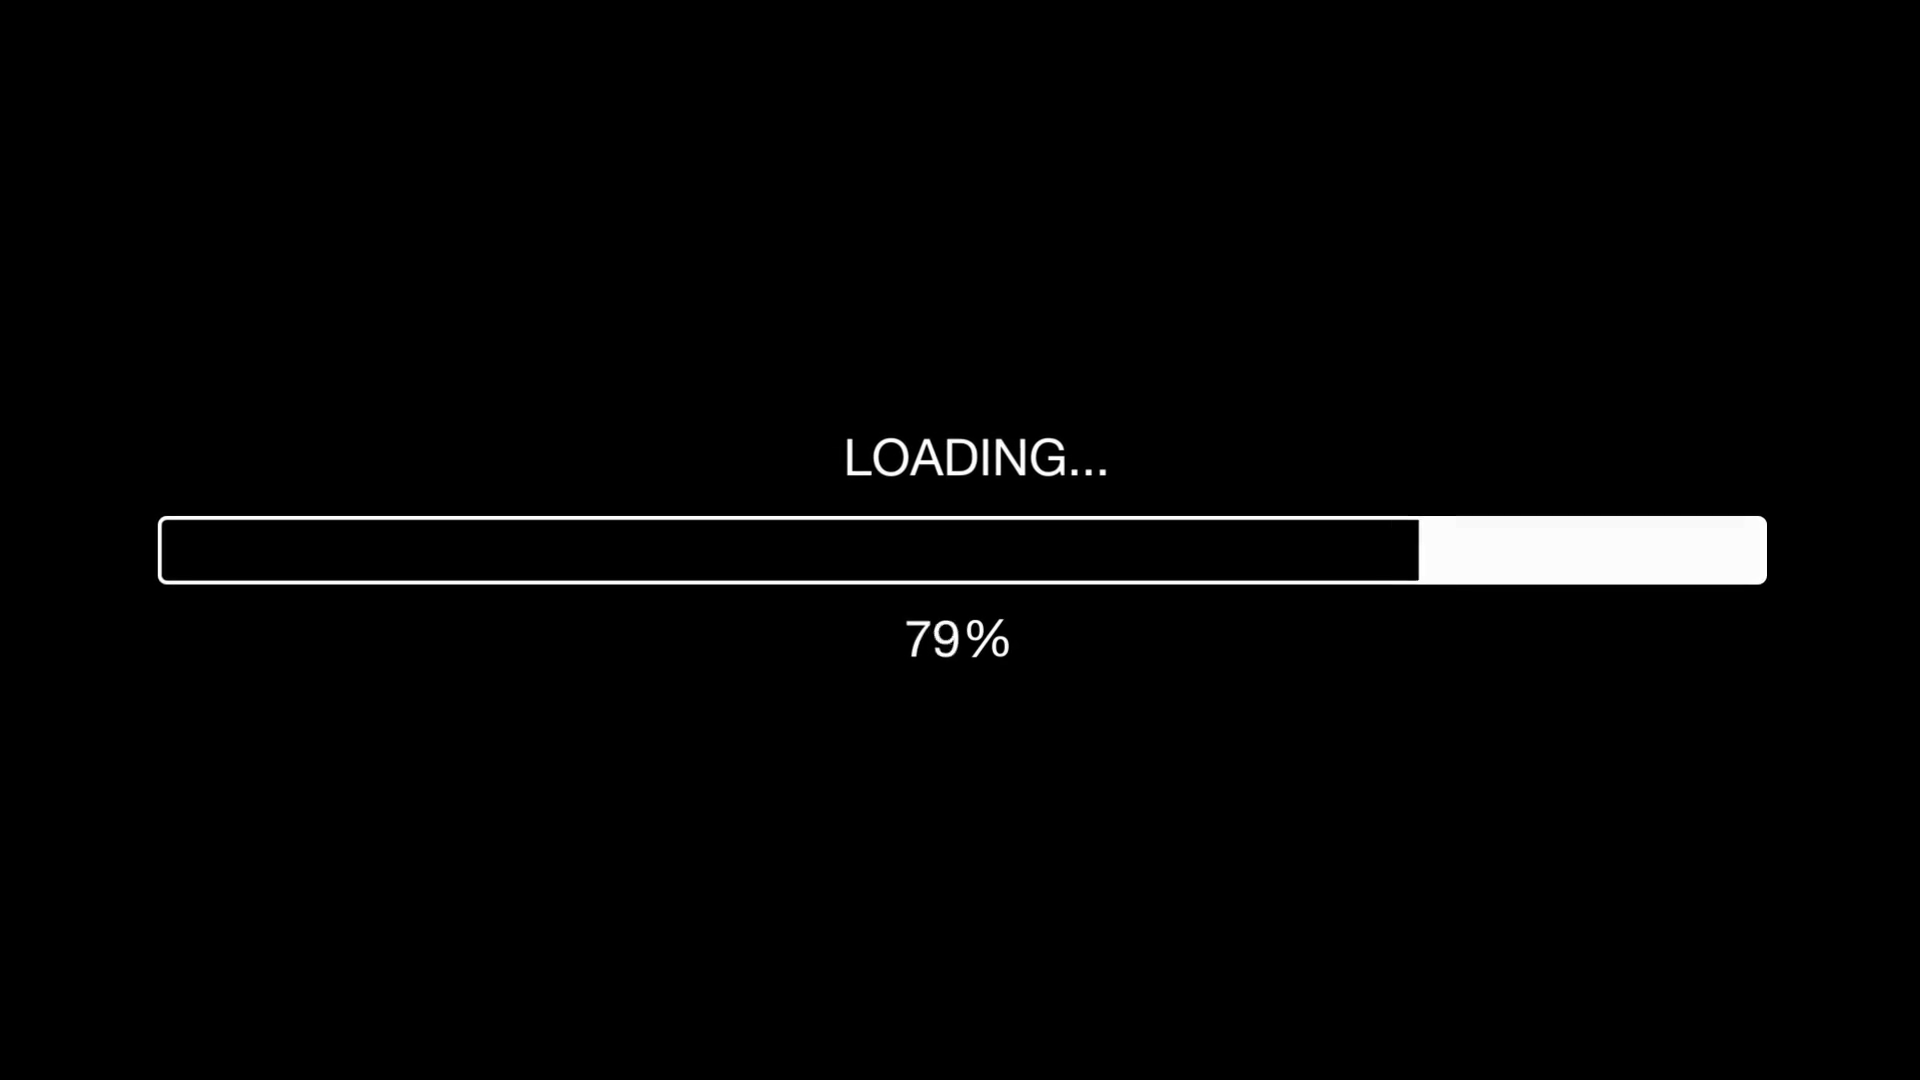 Computer Screen Loading Bar Animation 3 Stock Video Footage ...